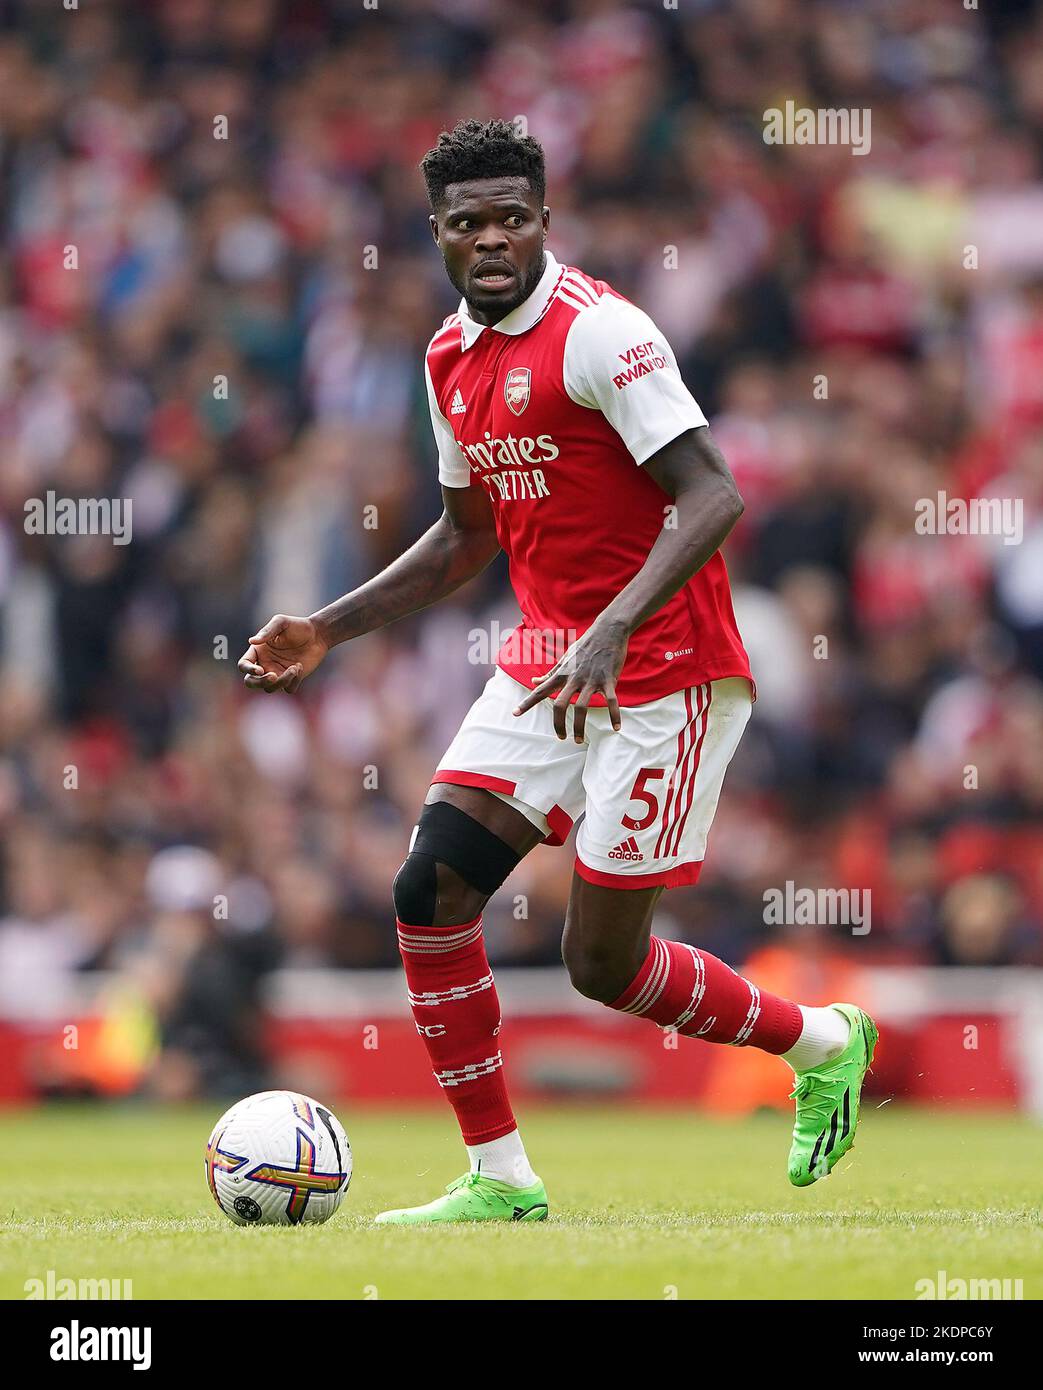 File photo dated 01-10-2022 of Arsenal's Thomas Partey. Star player for Ghana. Ghana bounced back from the humiliation of finishing bottom of their Africa Cup of Nations group by upsetting Nigeria on away goals in a qualifying play-off. Interim coach Addo has a hungry, young crop of players but has enjoyed just one win in 90 minutes since being appointed. The Black Stars are the lowest-ranked team in the tournament. Issue date: Tuesday November 8, 2022. Stock Photo